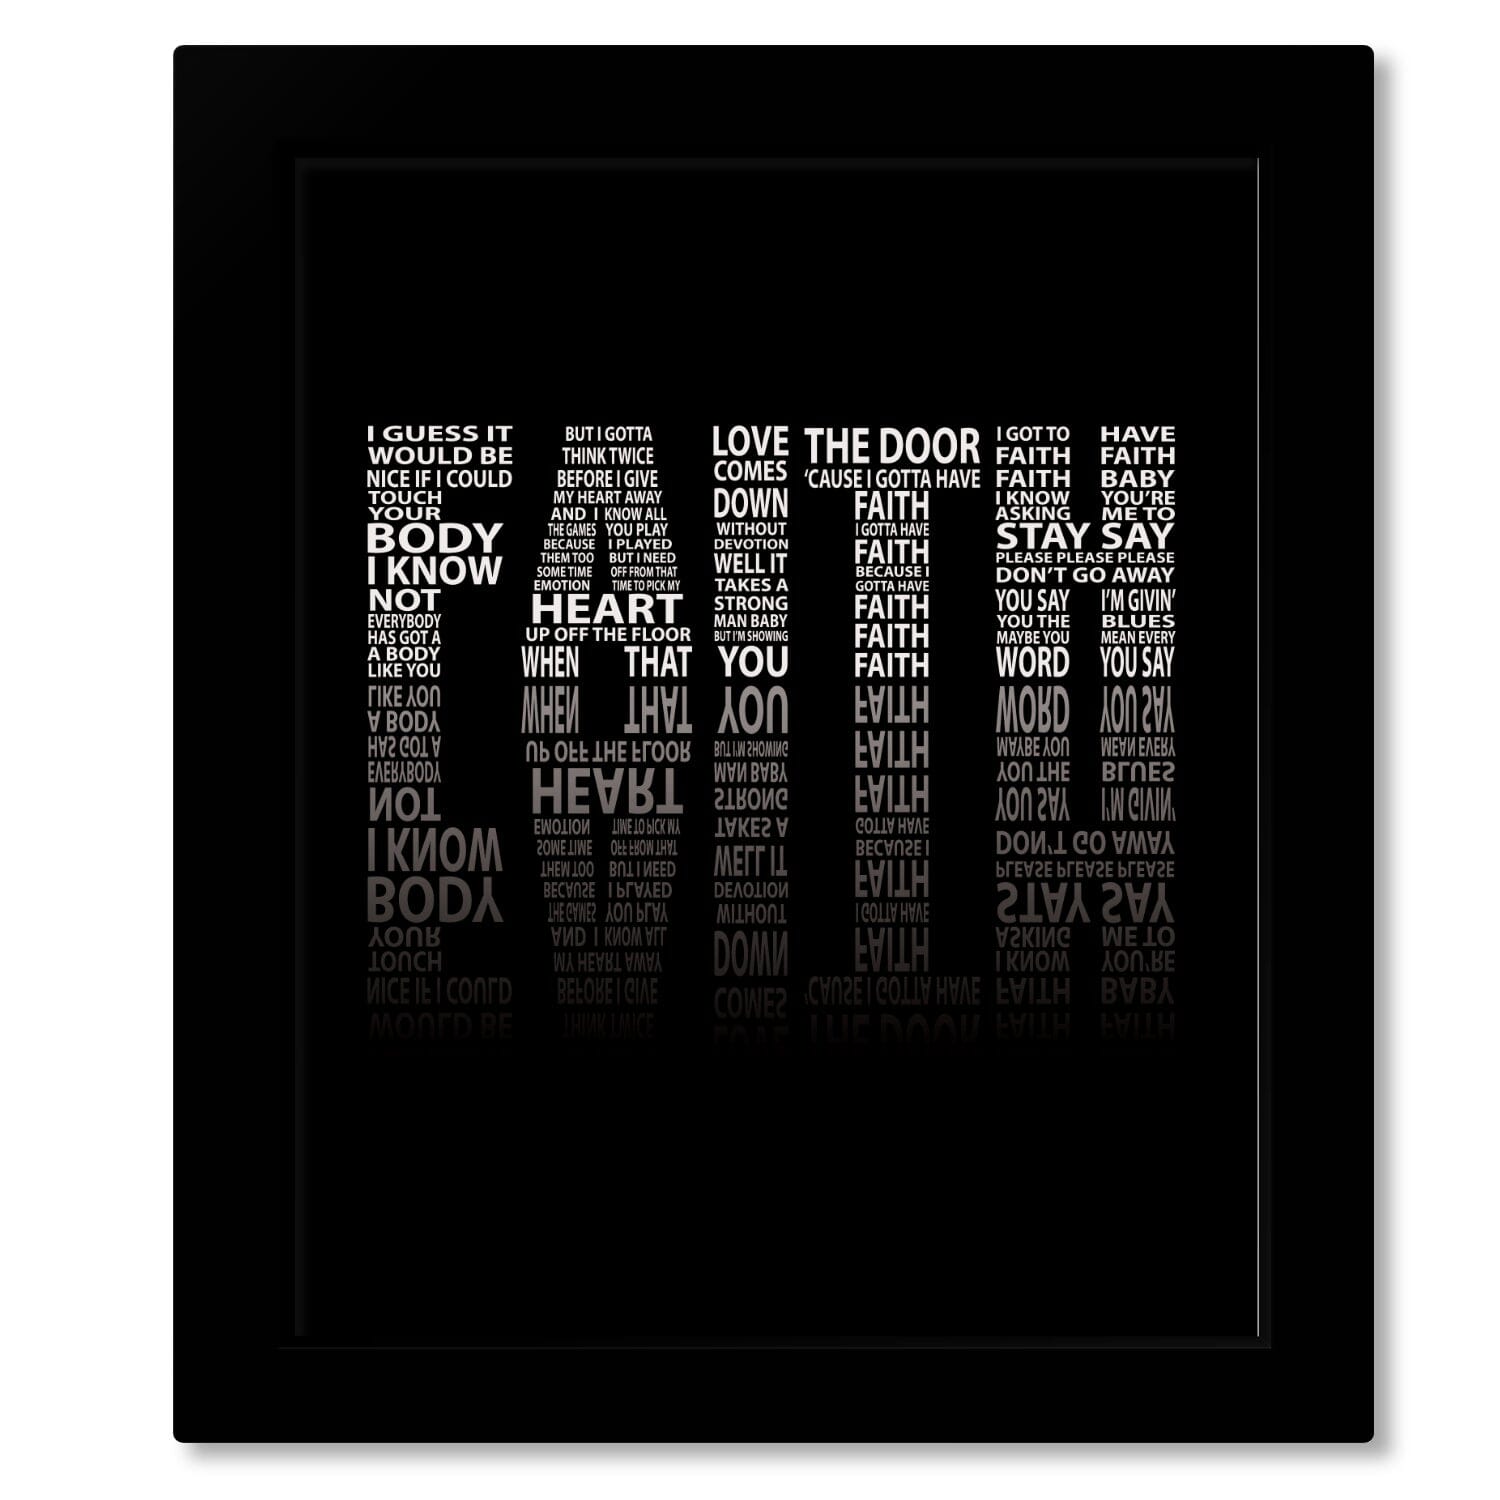 Faith by George Michael - 80s Song Lyric Art Poster Print Song Lyrics Art Song Lyrics Art 8x10 Framed Print (without mat) 